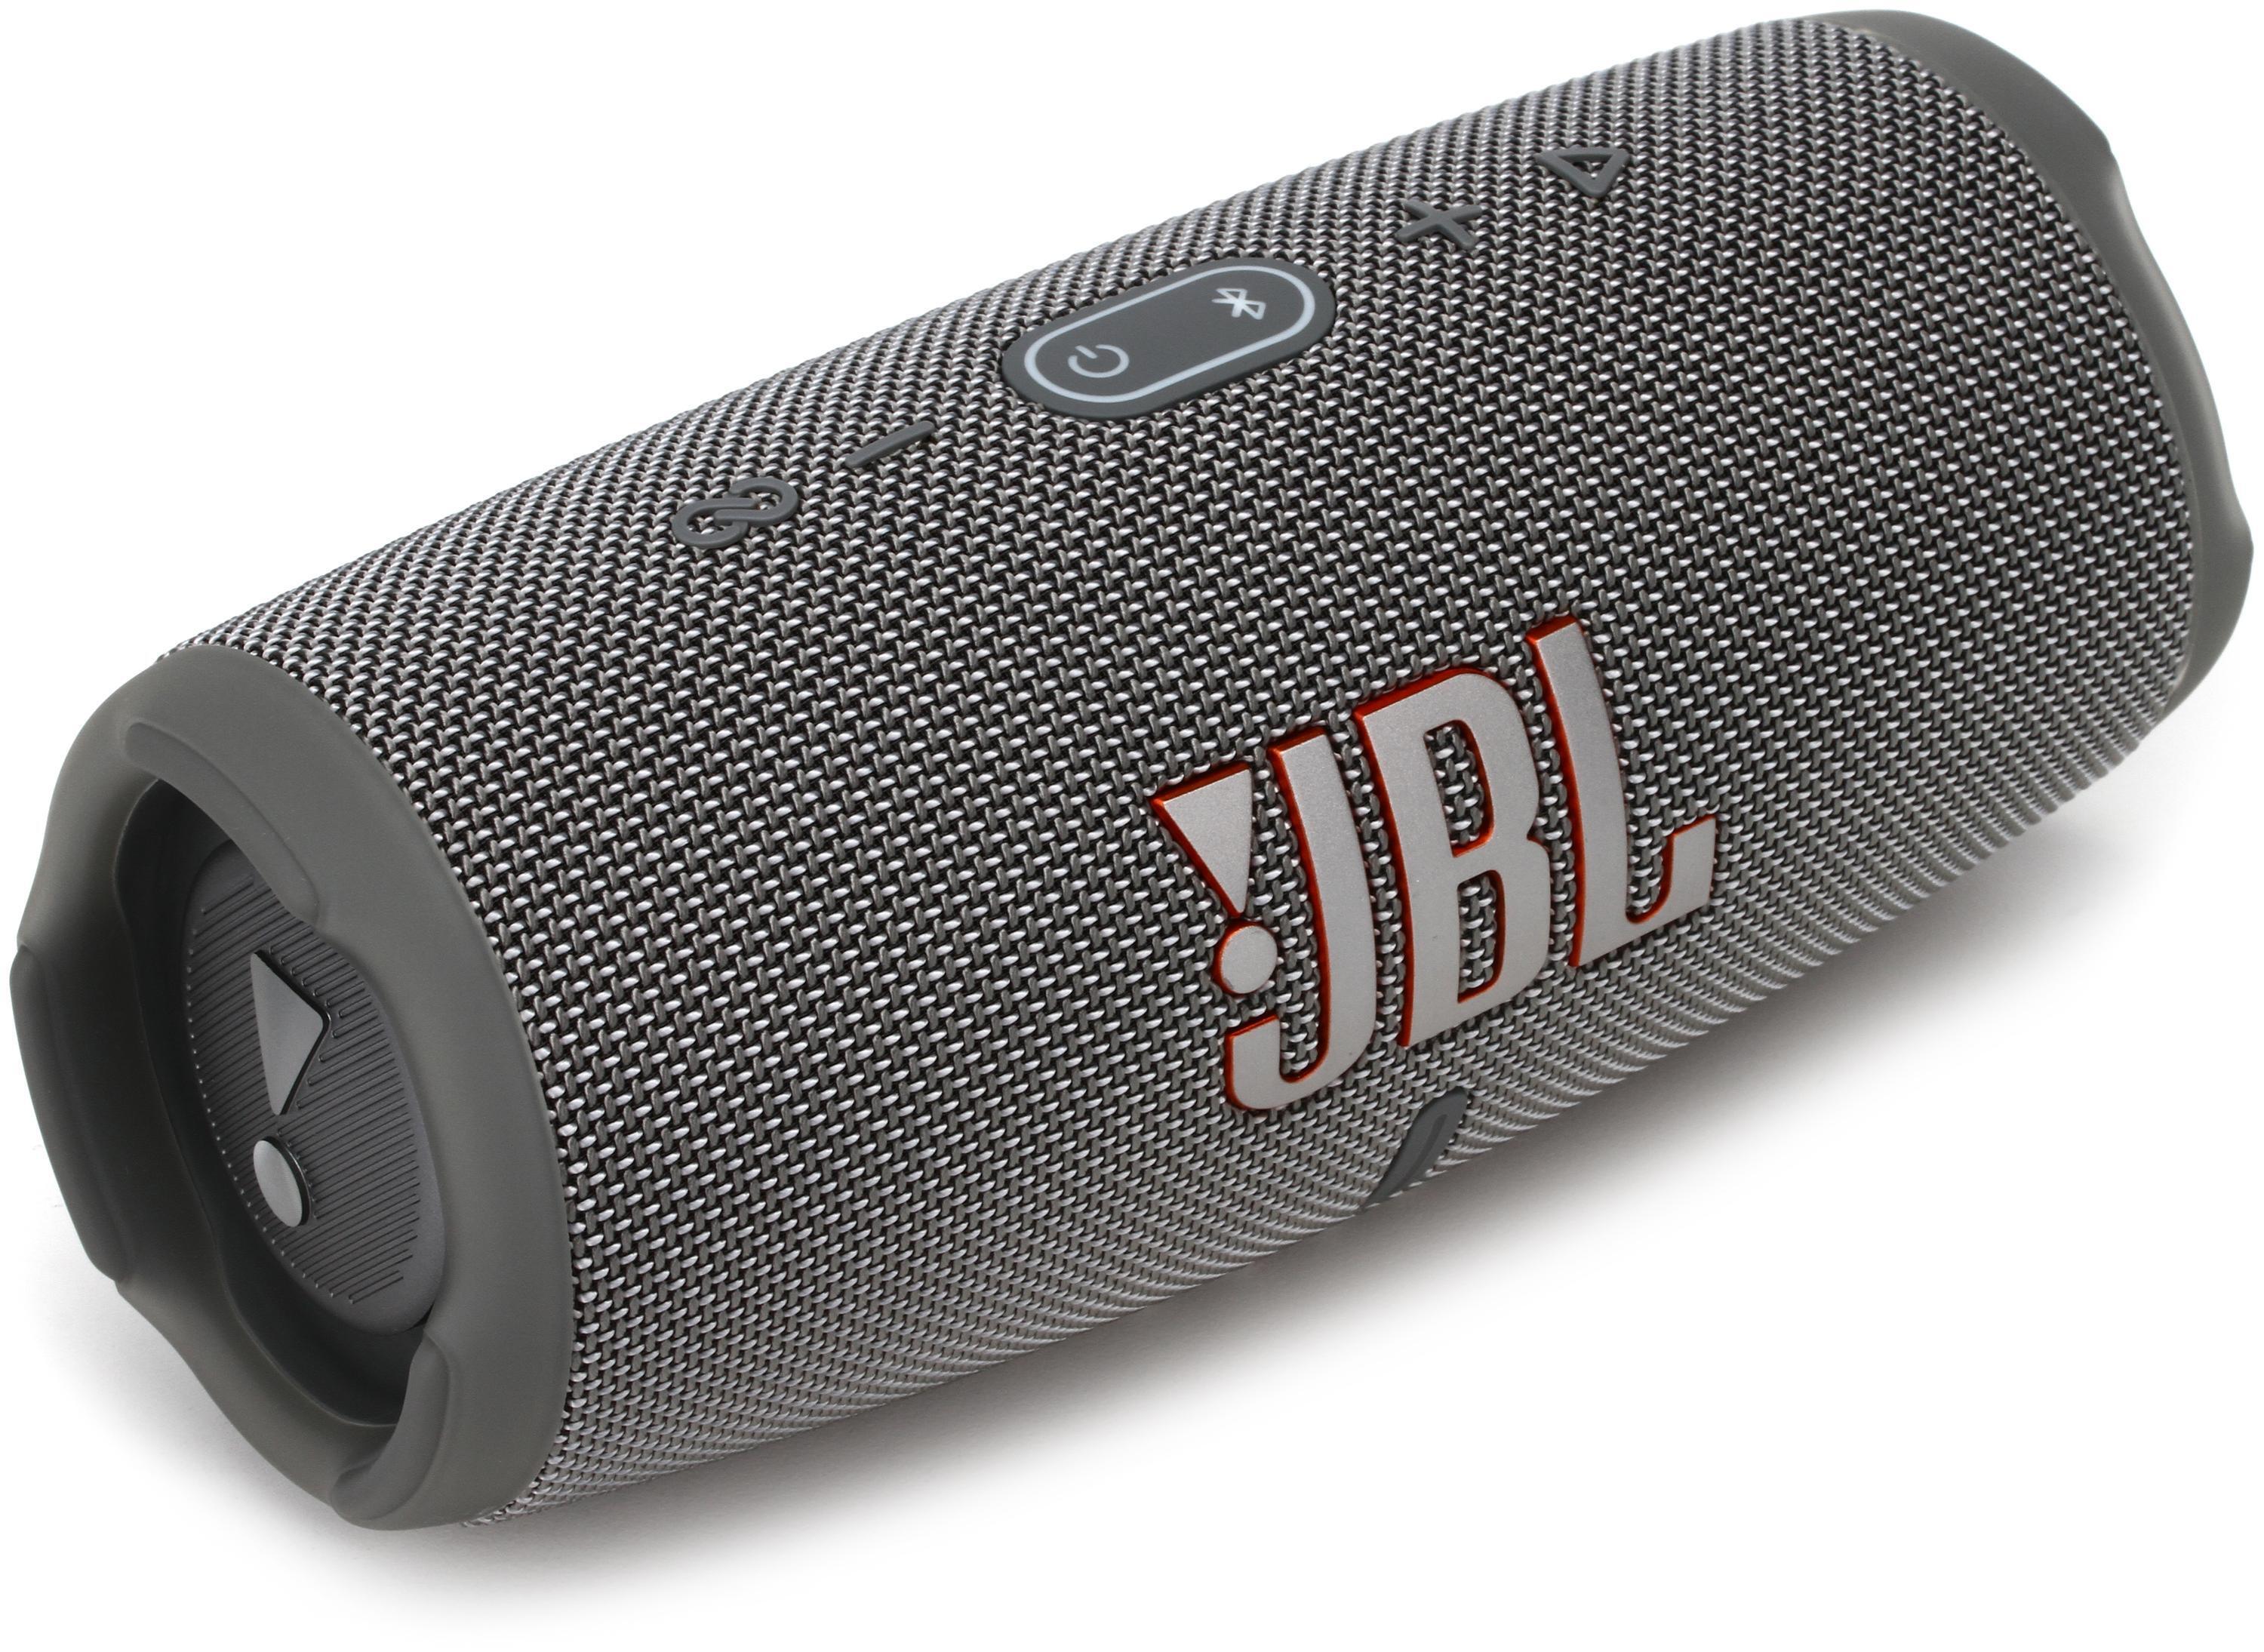 JBL debuts new Charge 5 Bluetooth speaker for $180 - CNET